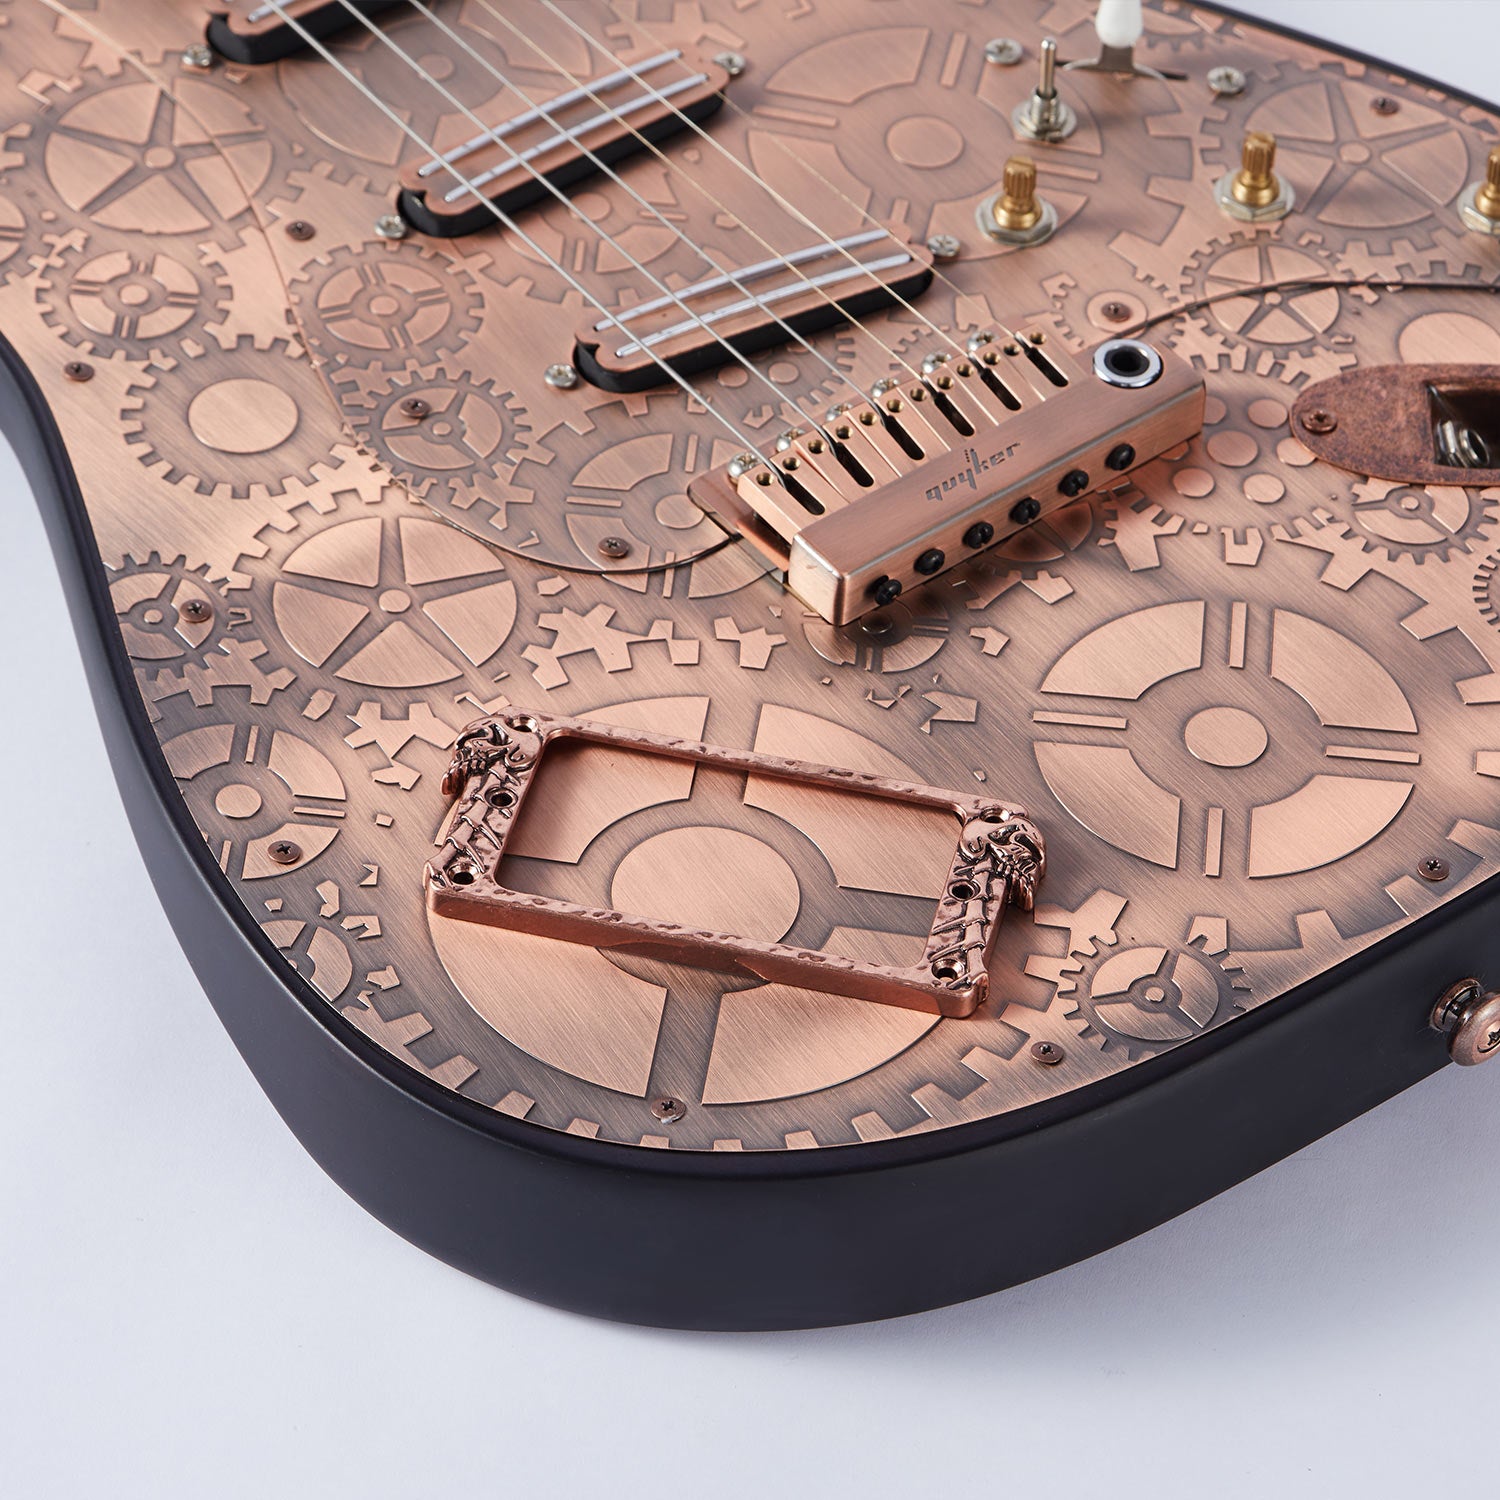 A premium pickup frame designed for a variety of electric guitars.